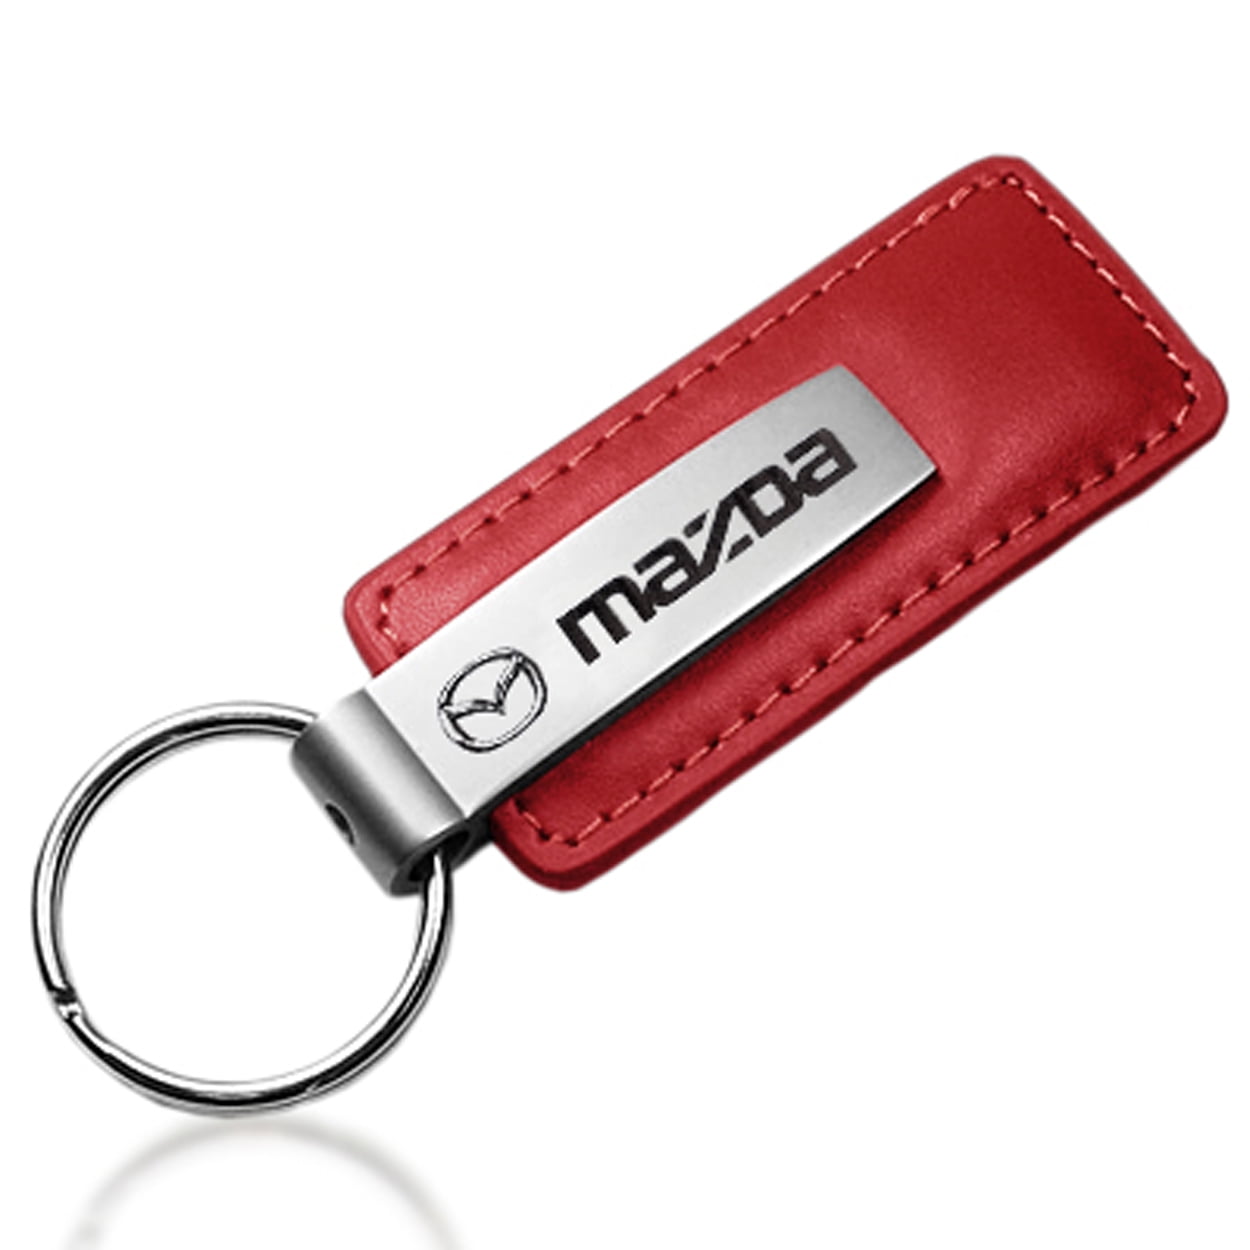 au-tomotive gold, inc. mazda logo red leather car key chain, official  licensed 